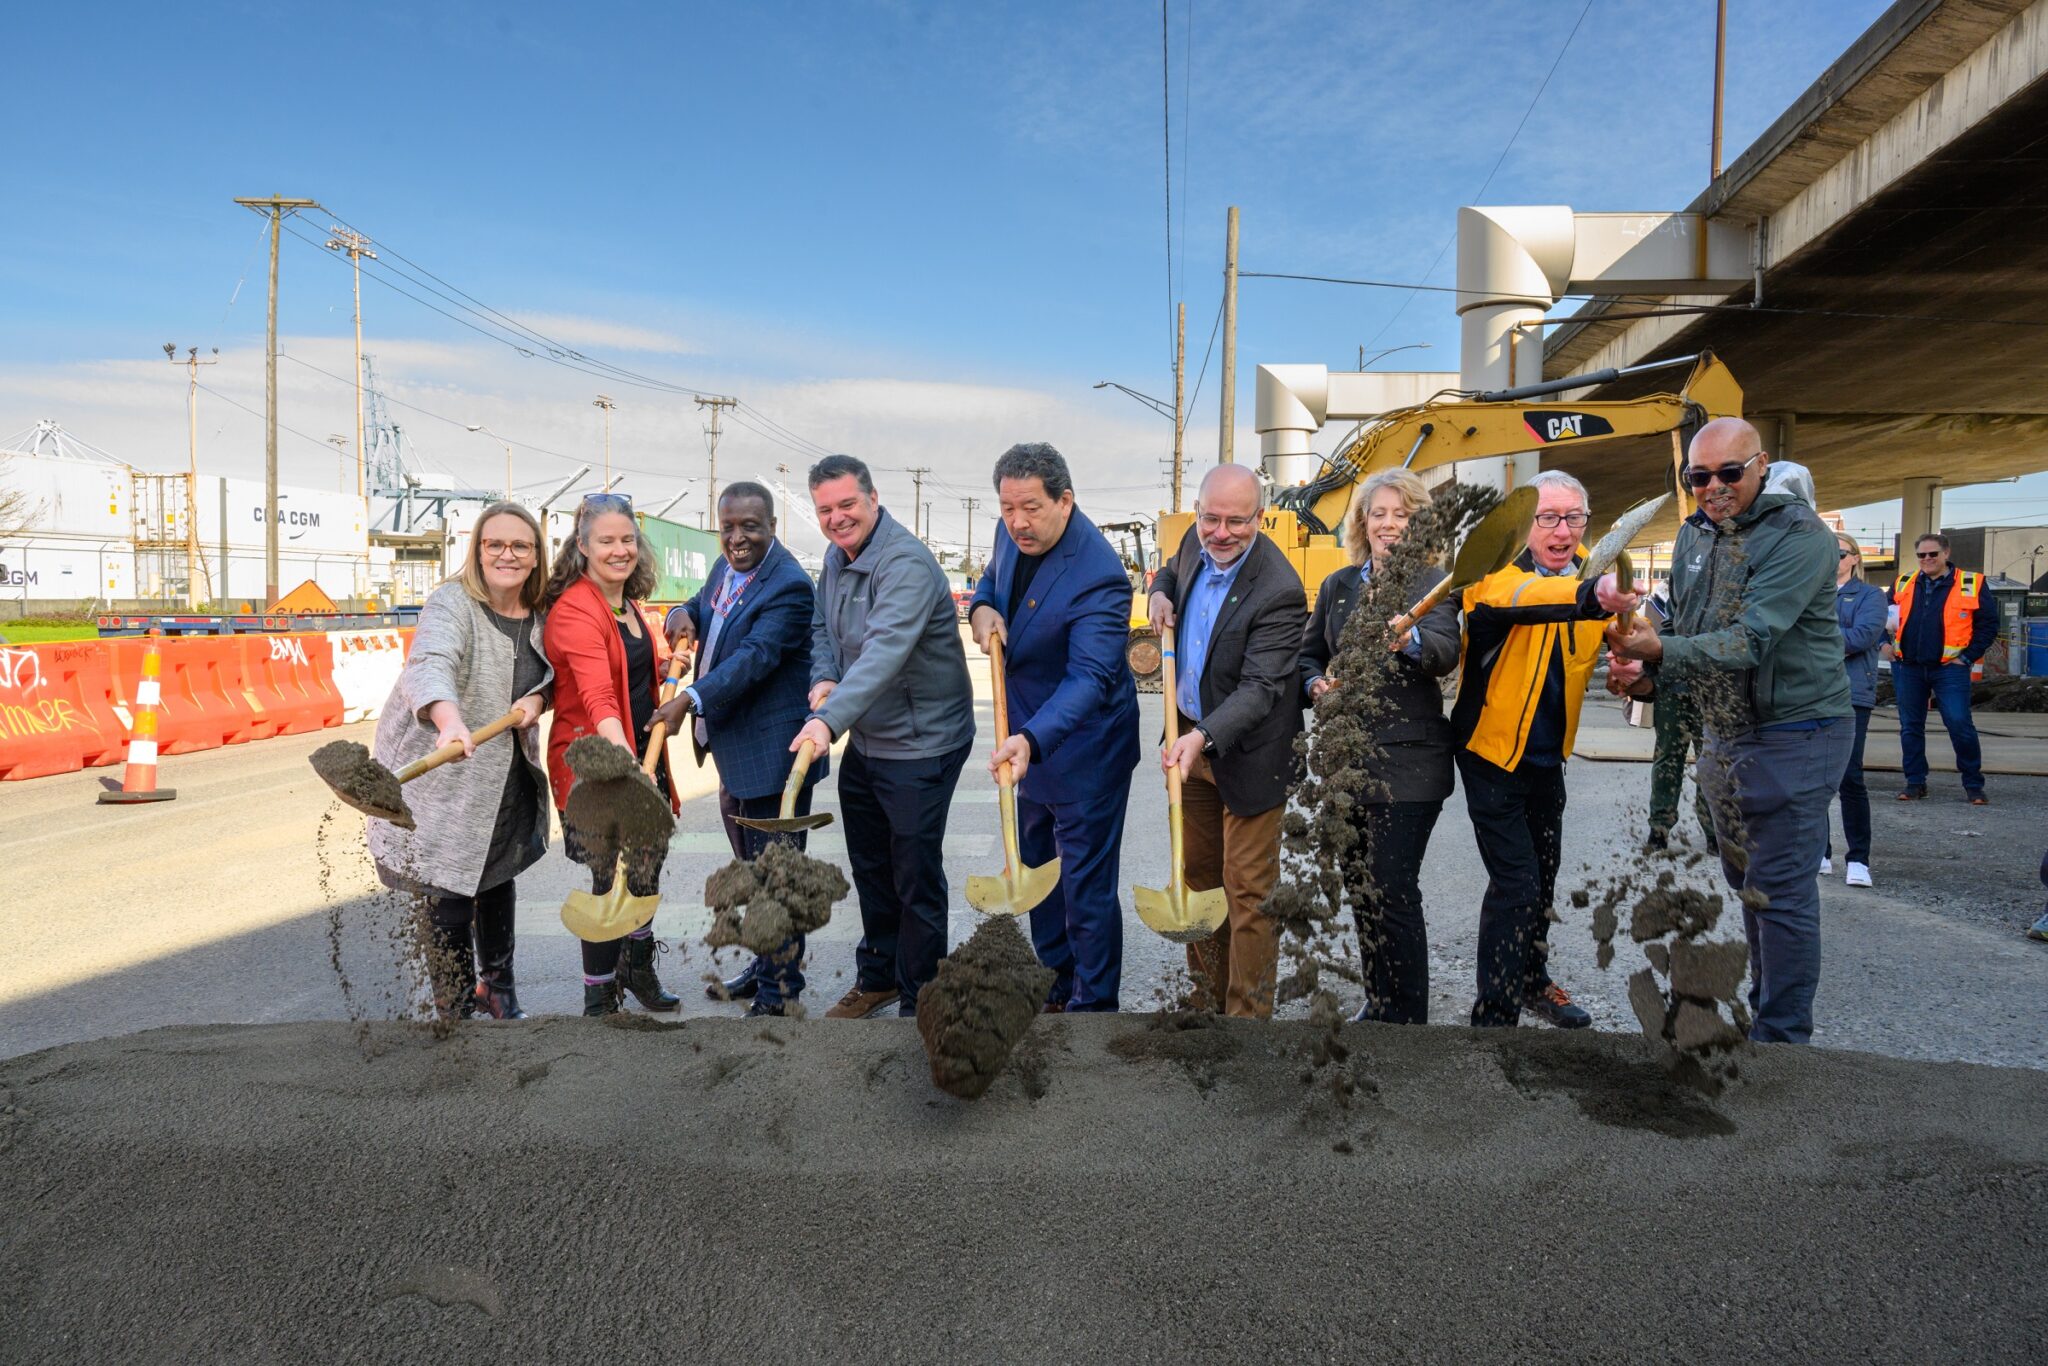 Several people use shovels at a groundbreaking event while smiling outdoors.